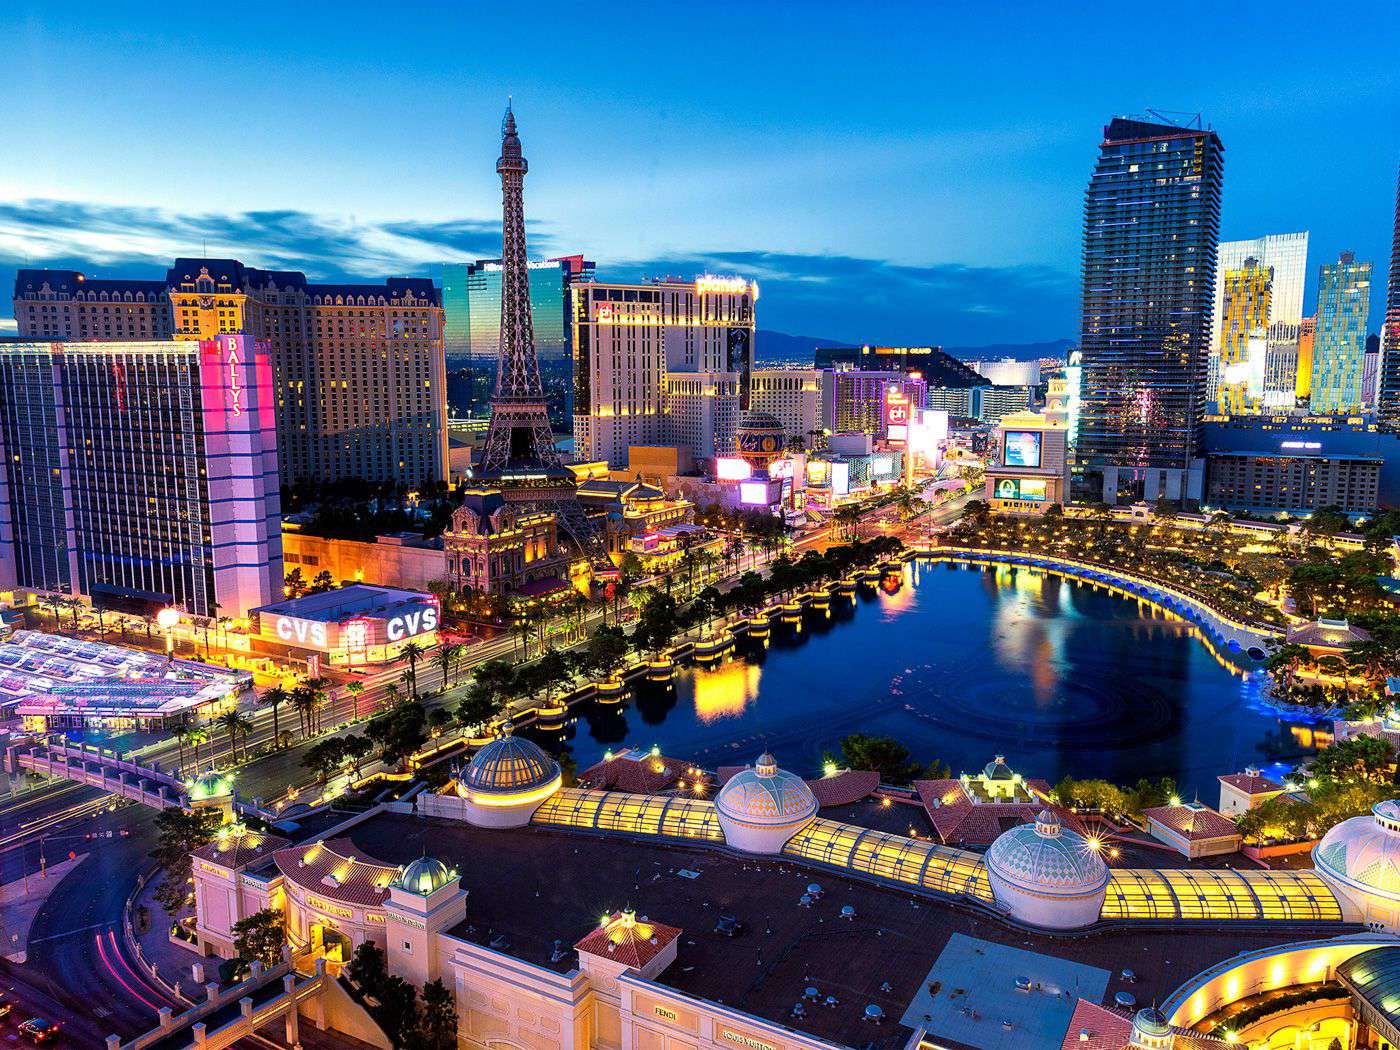 Things You Should Stop Wasting Money on in Las Vegas, From a Local